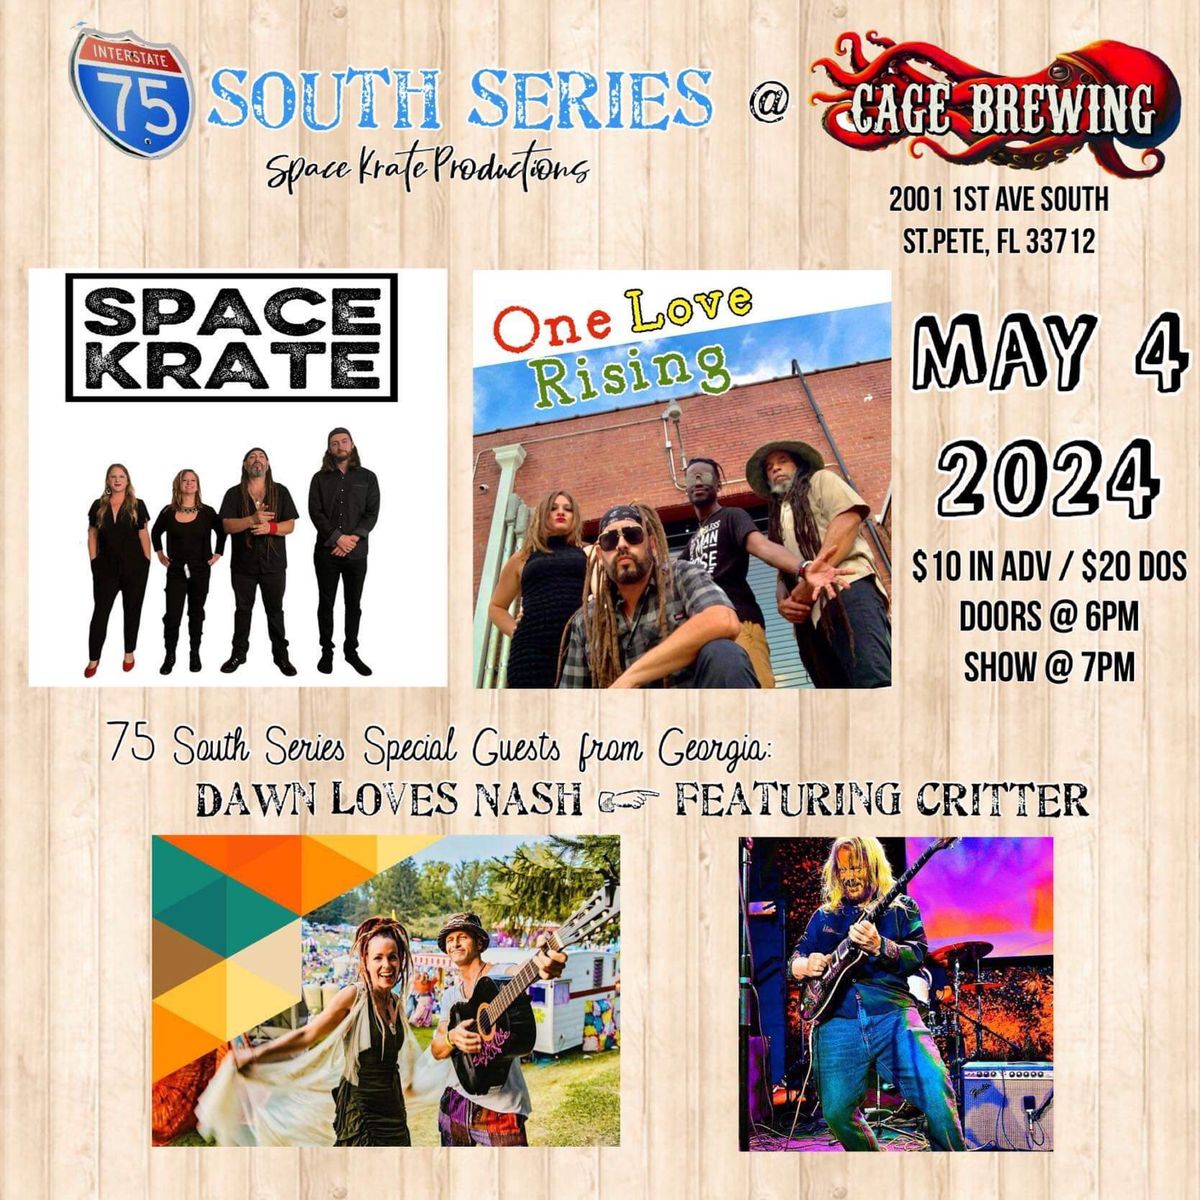 75 South Series: Space Krate~One Love Rising~Dawn Loves Nash feat. Critter @ Cage Brewing